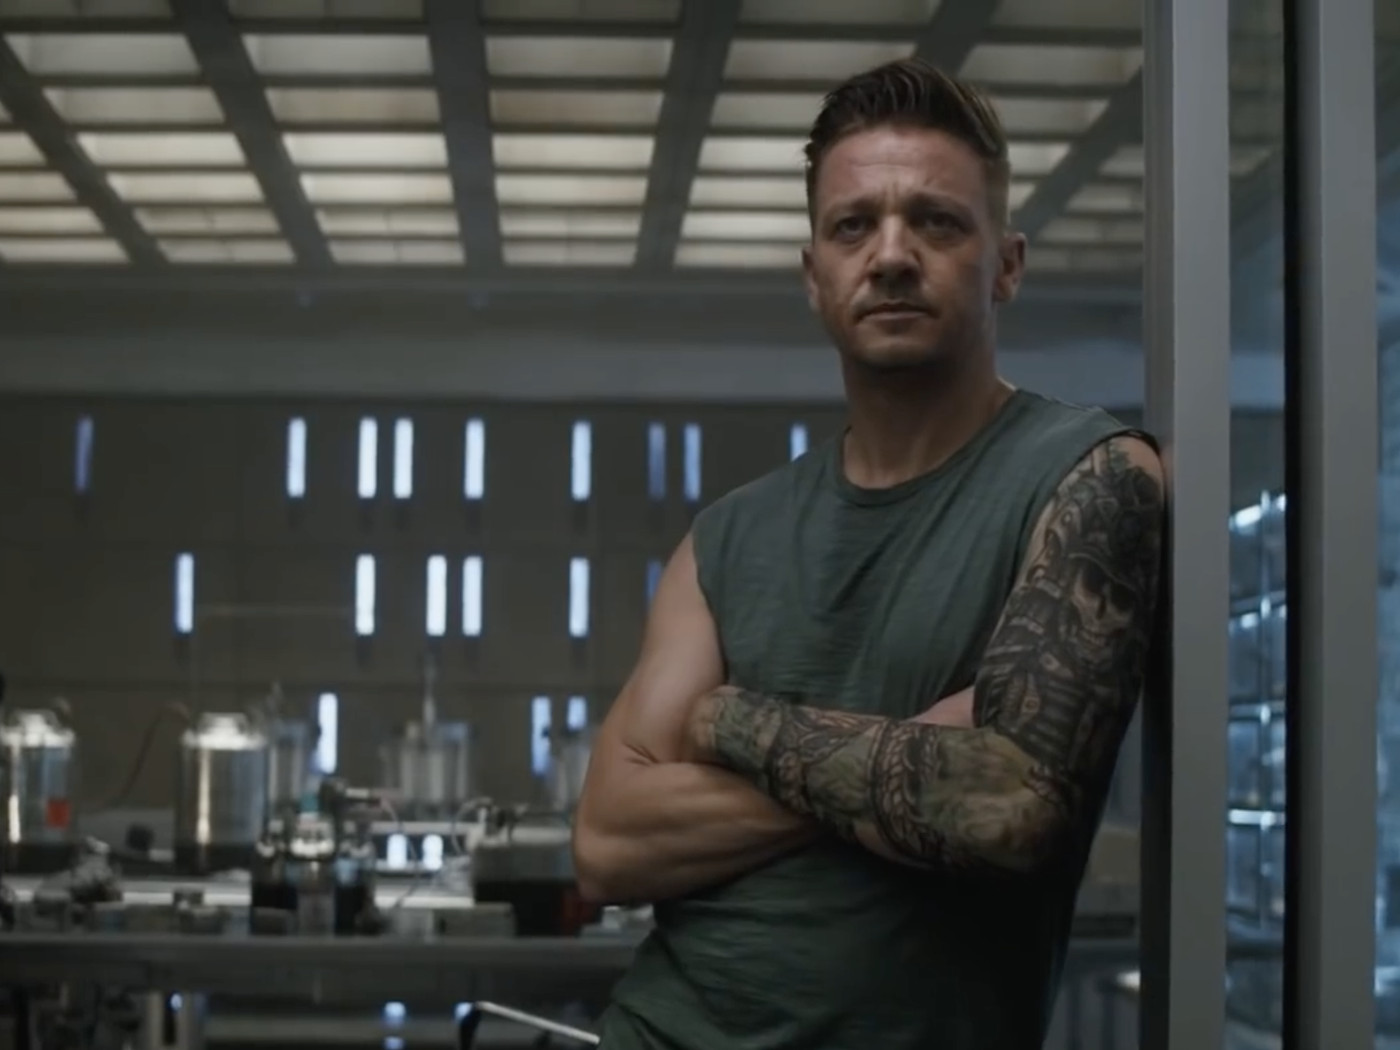 Why Avengers fans are losing it over Hawkeye's grungy tattoos